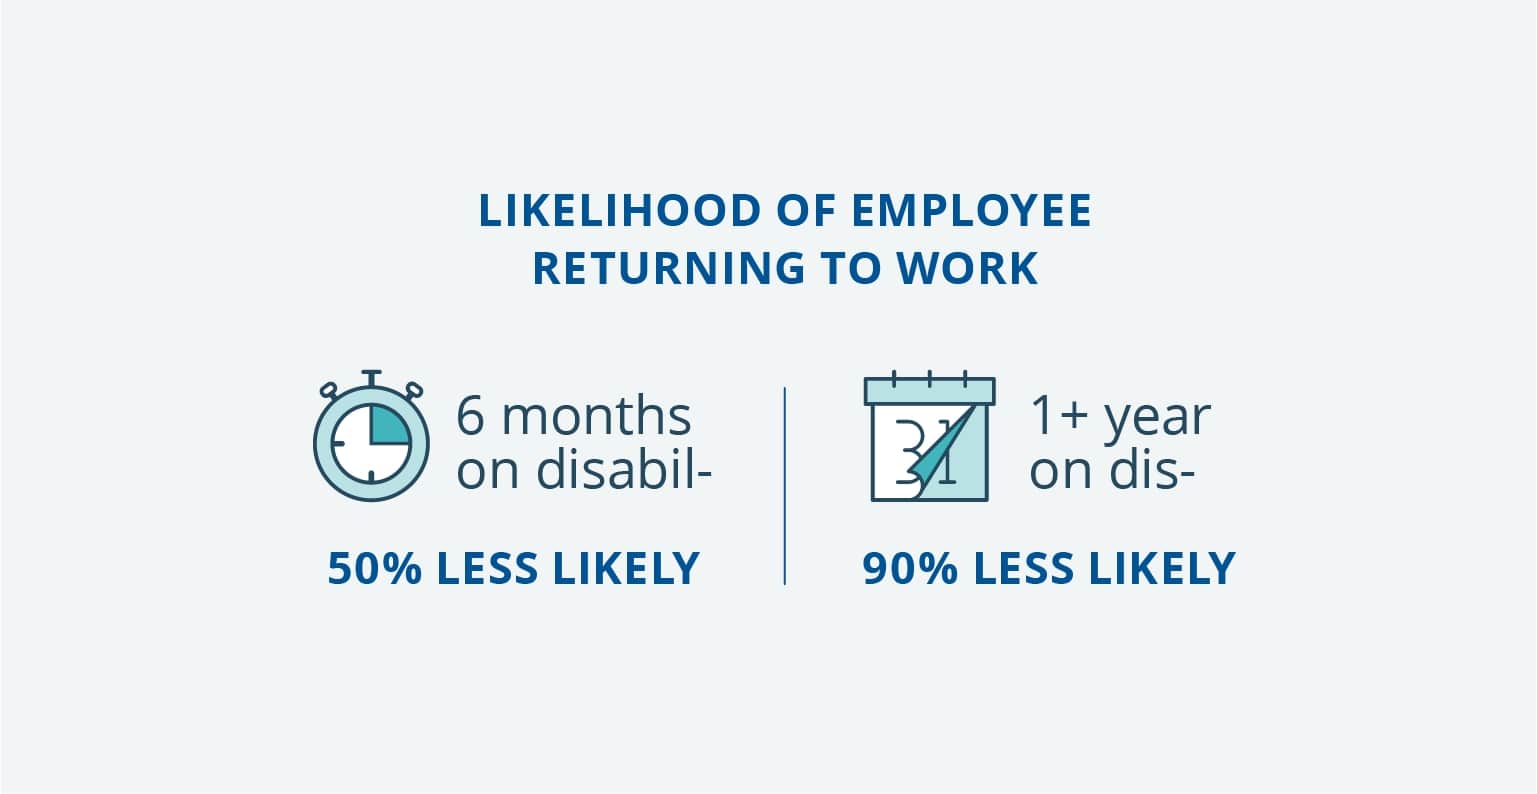 An effective return-to-work strategy and dedicated mental health support from disability providers can reduce the likelihood of a short-term disability claim advancing to a long-term disability claim.  (Source: Unum Disability Guide 2020)